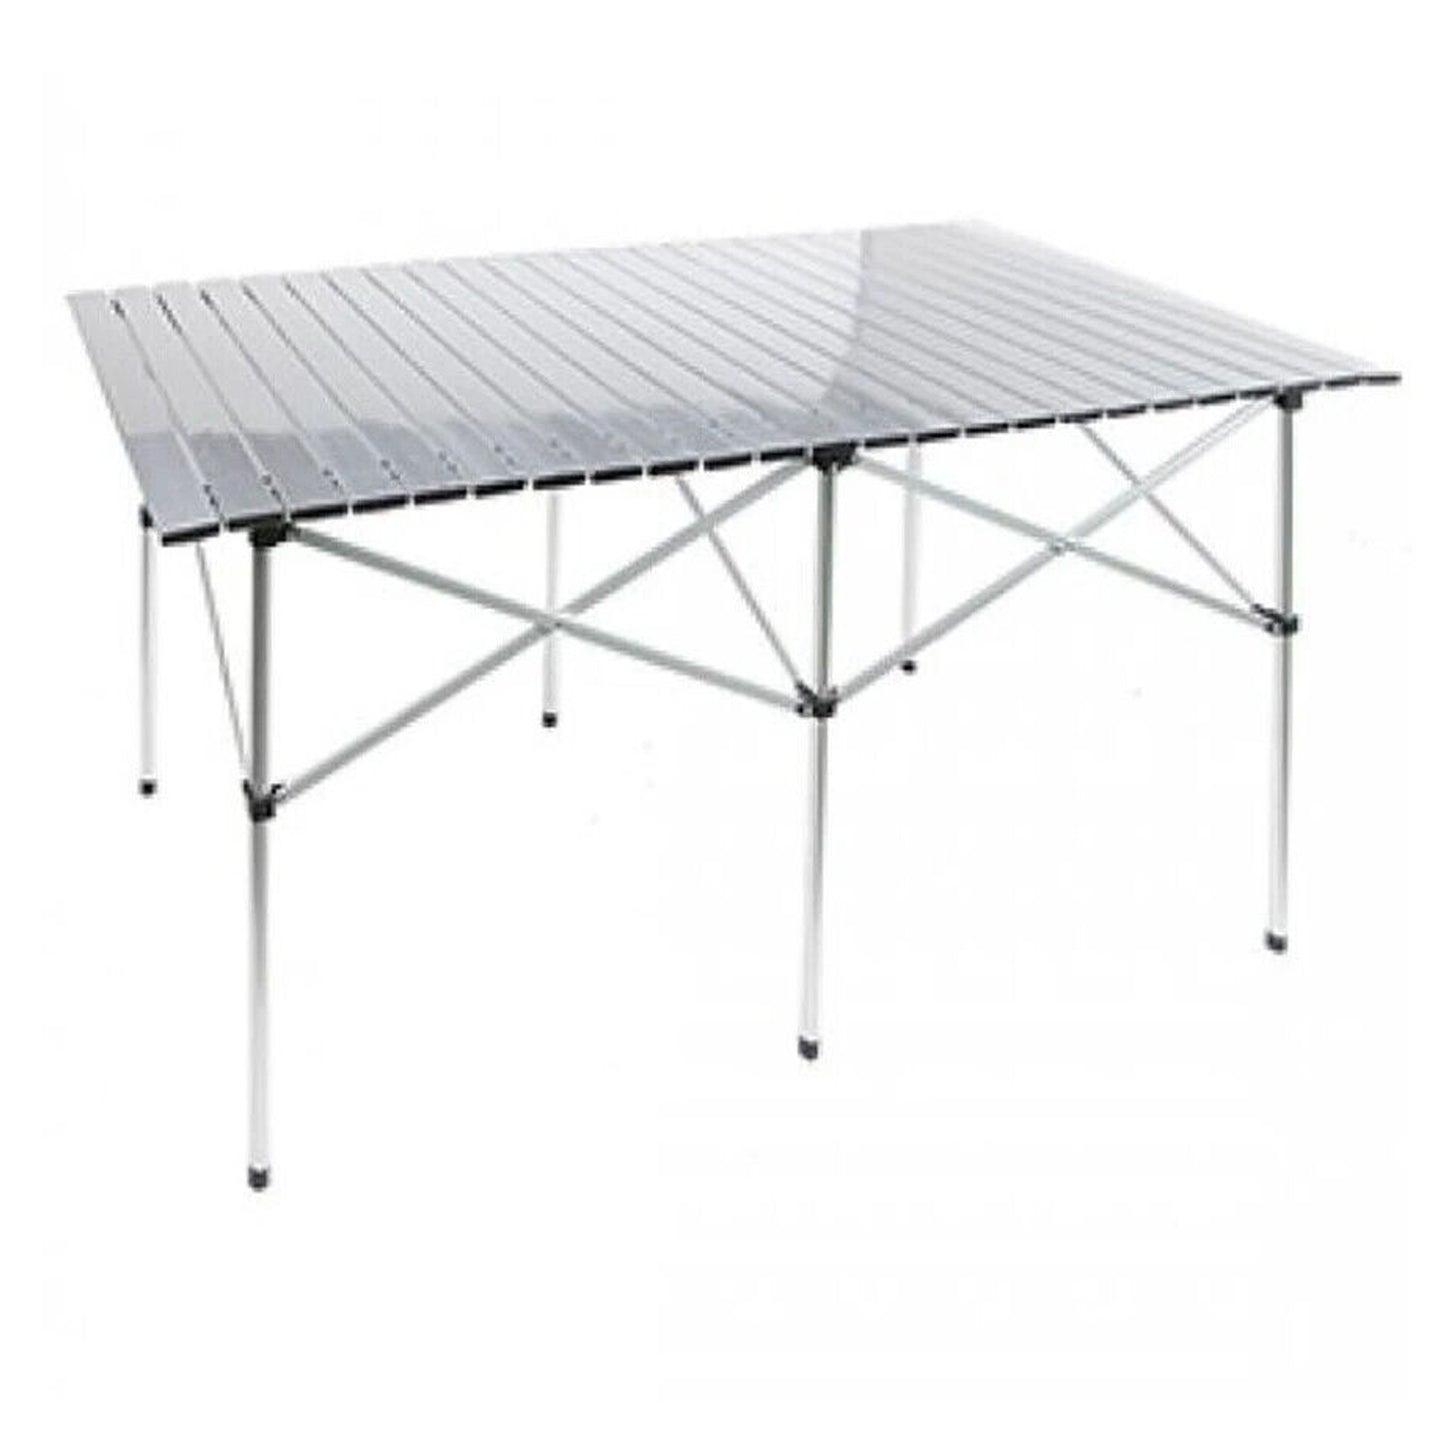 Double Aluminium Table with Roll Top